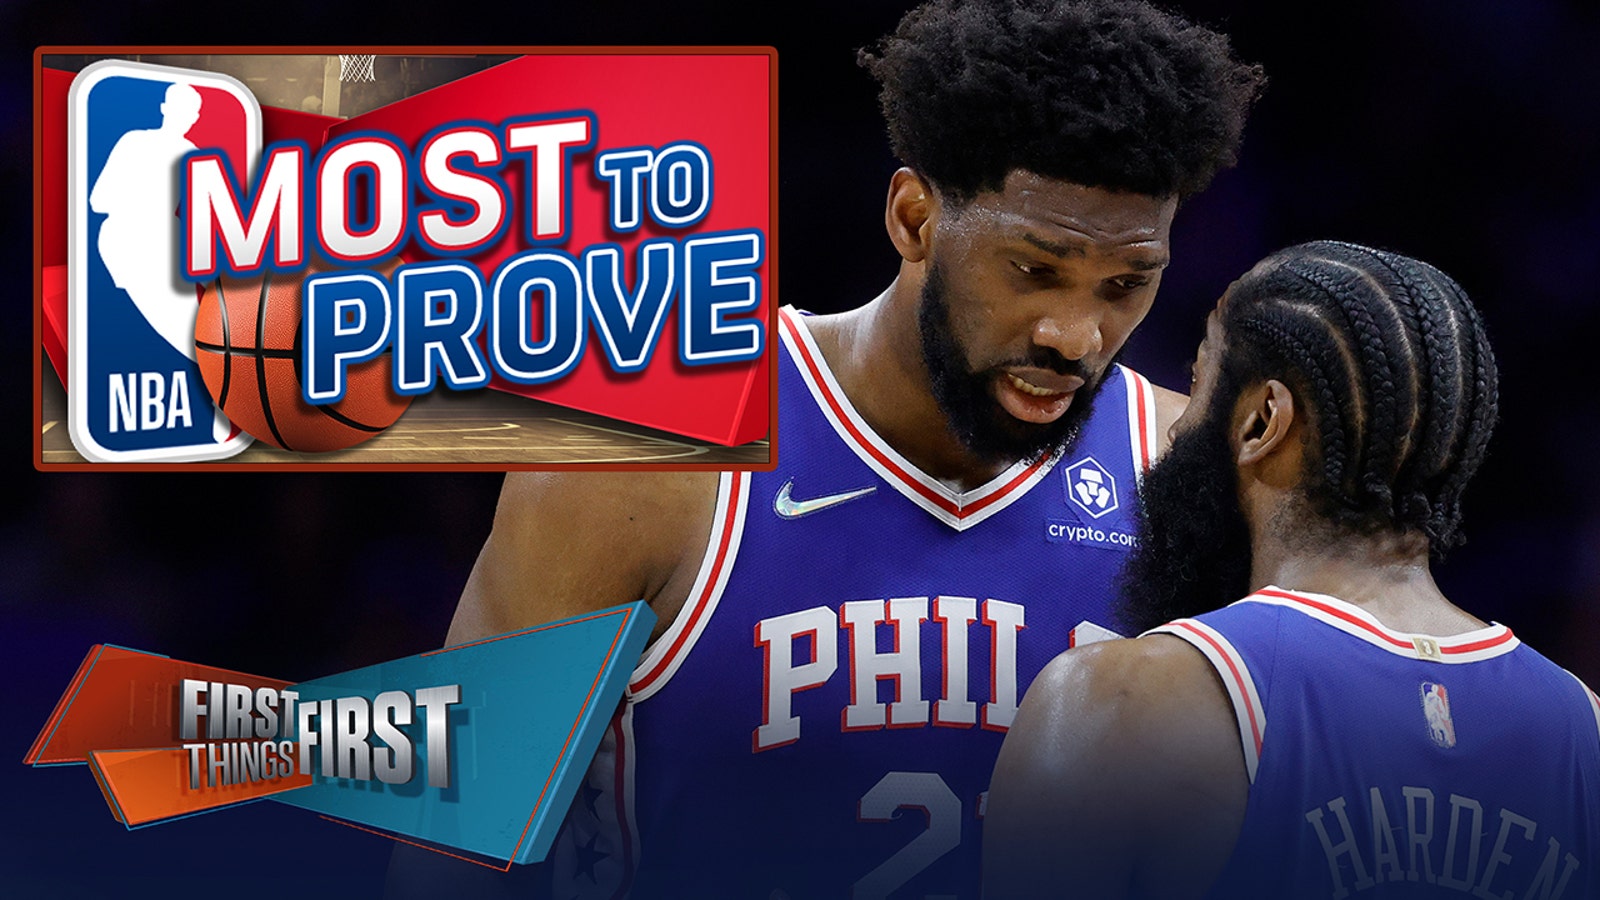 James Harden, Joel Embiid & 76ers among the 'Most to Prove' post NBA All-Star break 